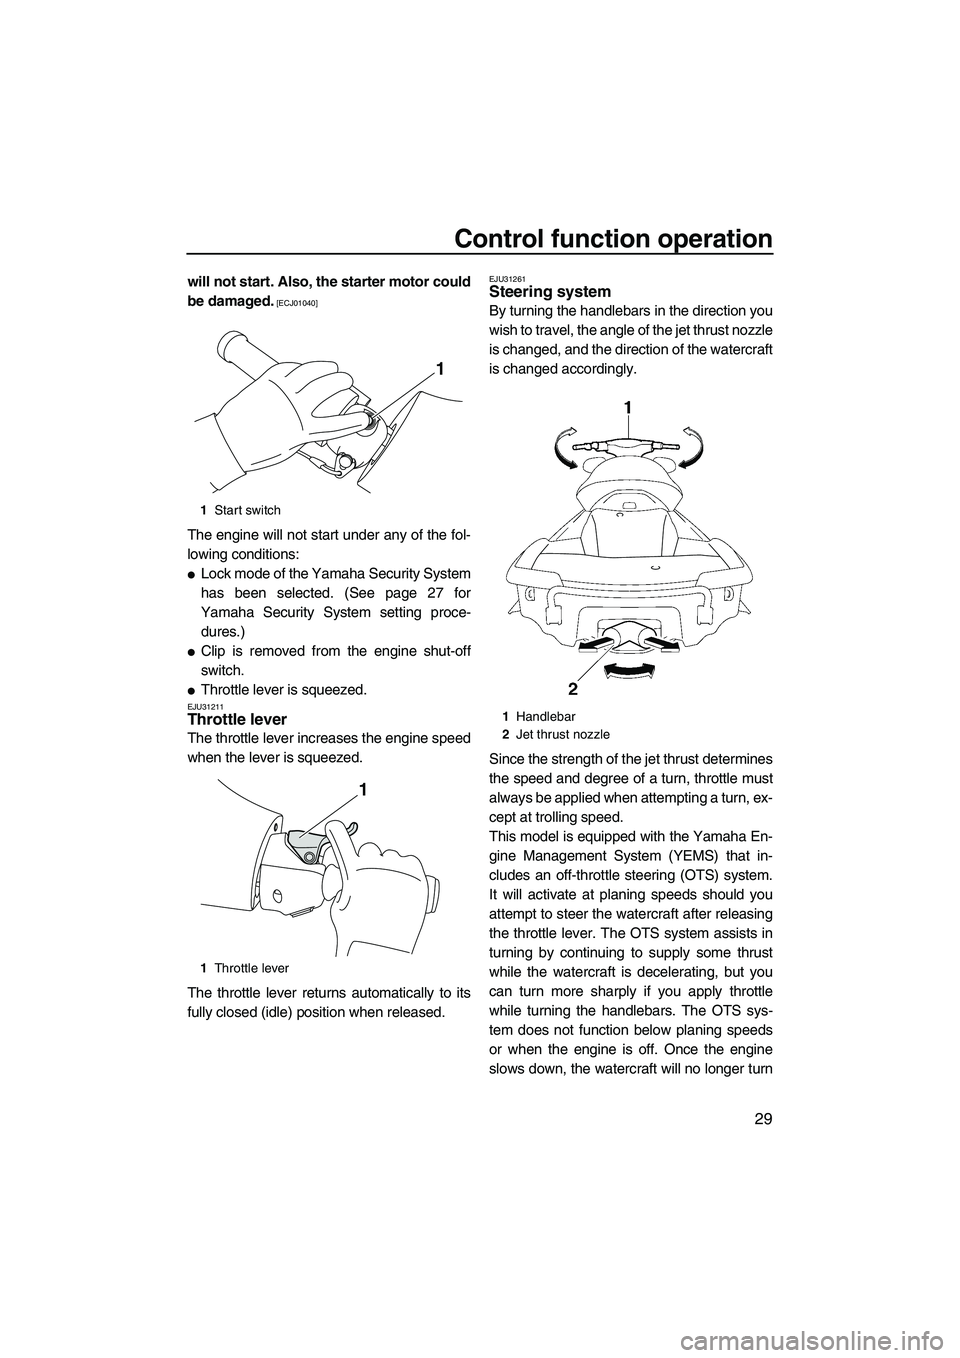 YAMAHA SVHO 2011  Owners Manual Control function operation
29
will not start. Also, the starter motor could
be damaged.
 [ECJ01040]
The engine will not start under any of the fol-
lowing conditions:
Lock mode of the Yamaha Security